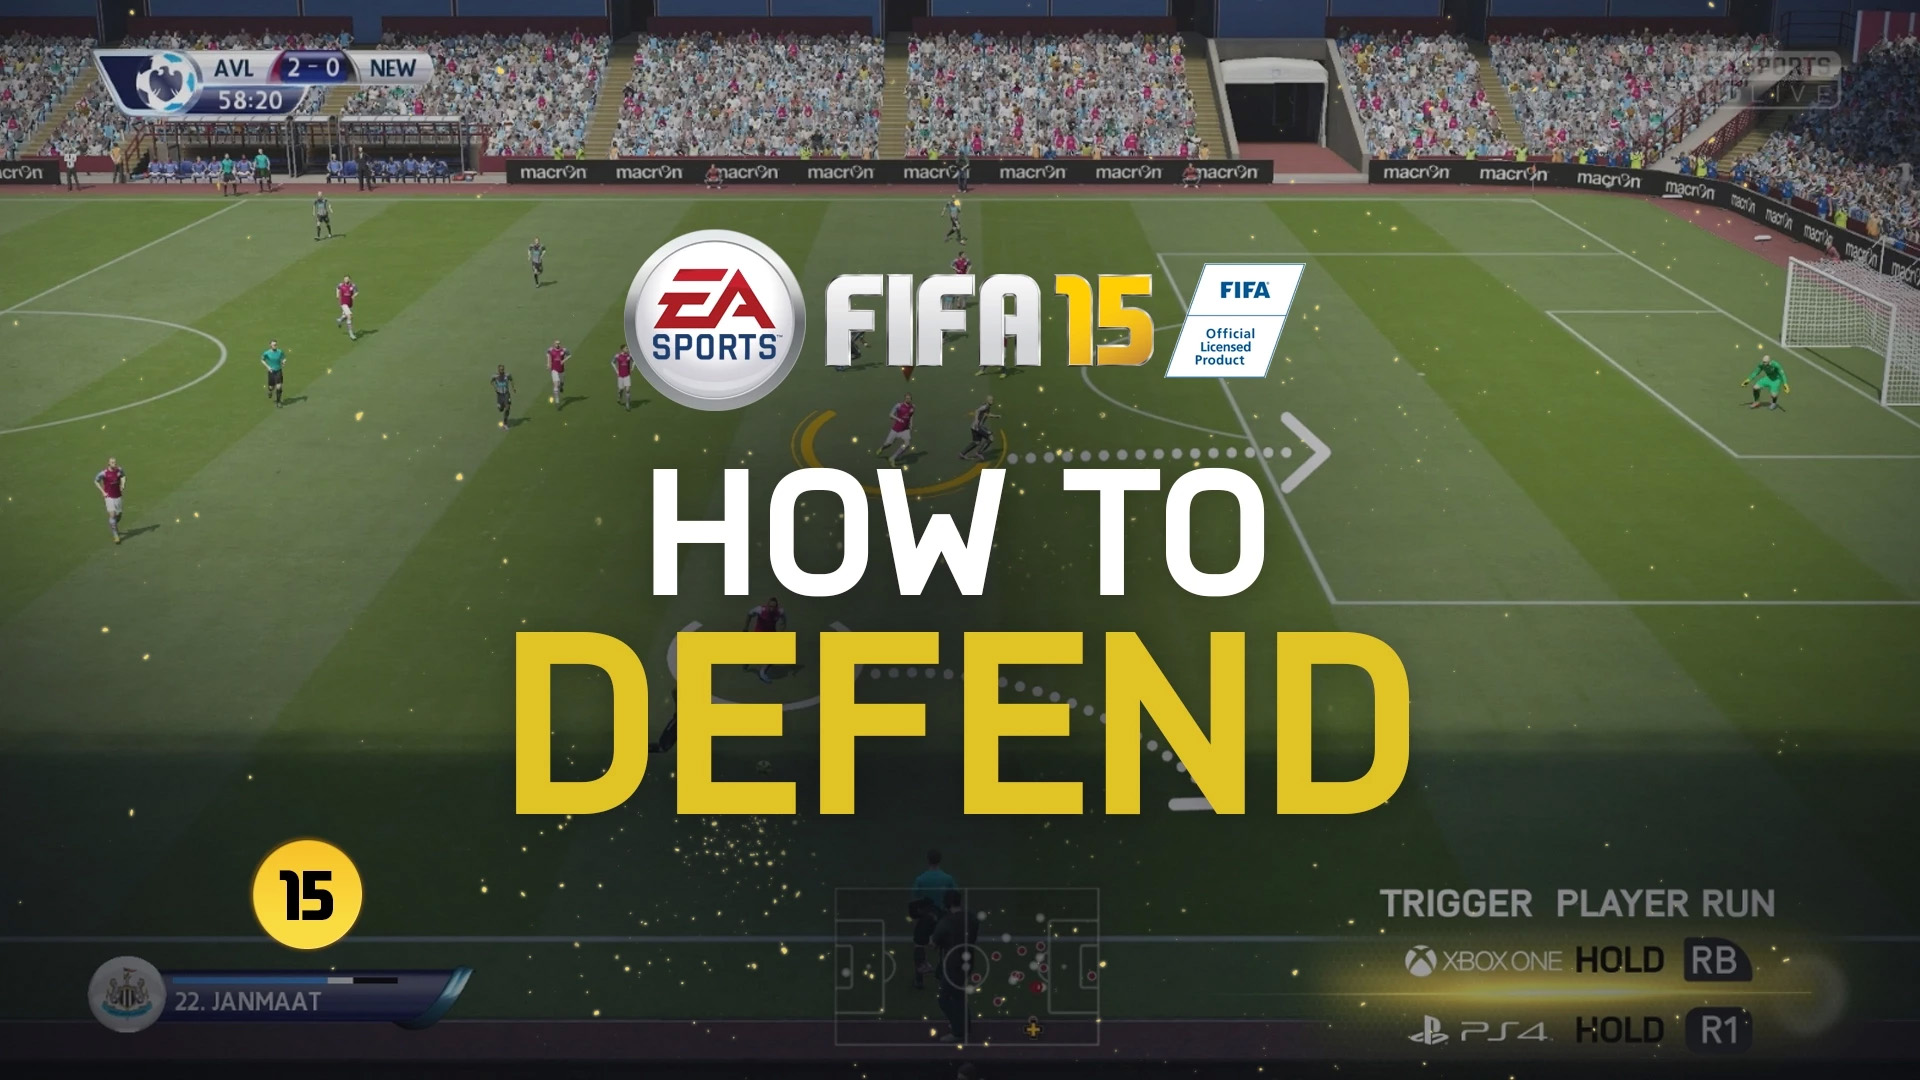 Learn how to defend in FIFA 15 with this gameplay defending tutorial covering basic to advanced tactics.